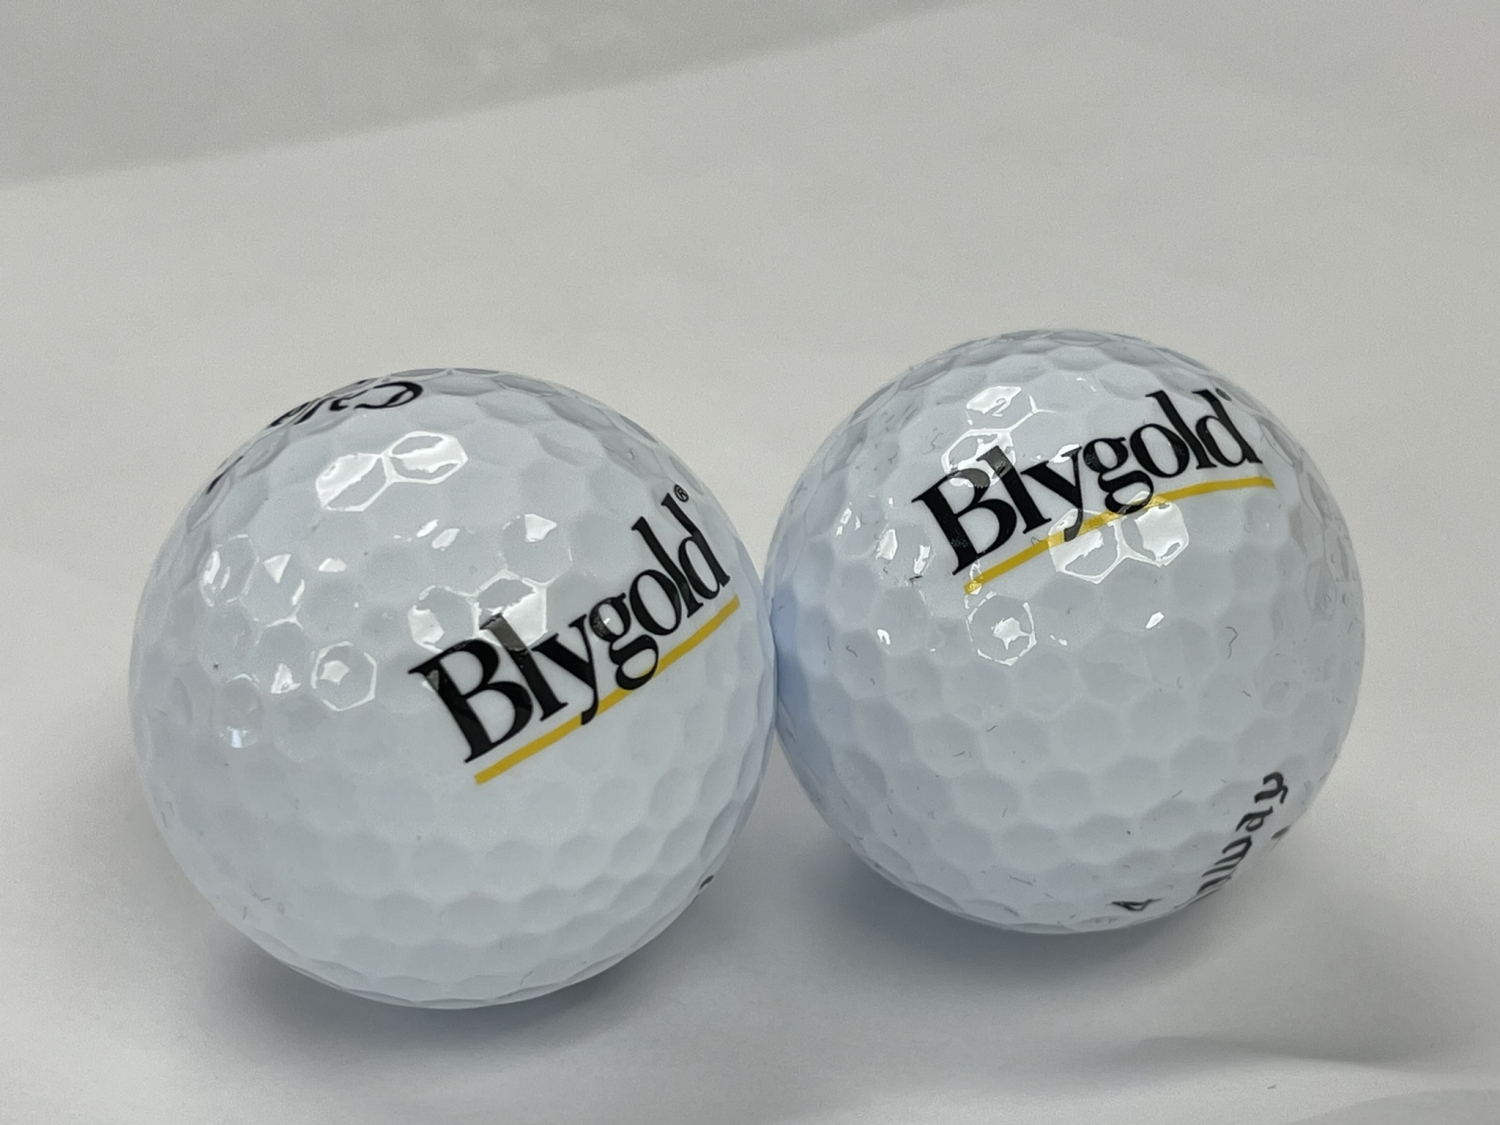 Picture of Blygold Charity Golf Day golf balls